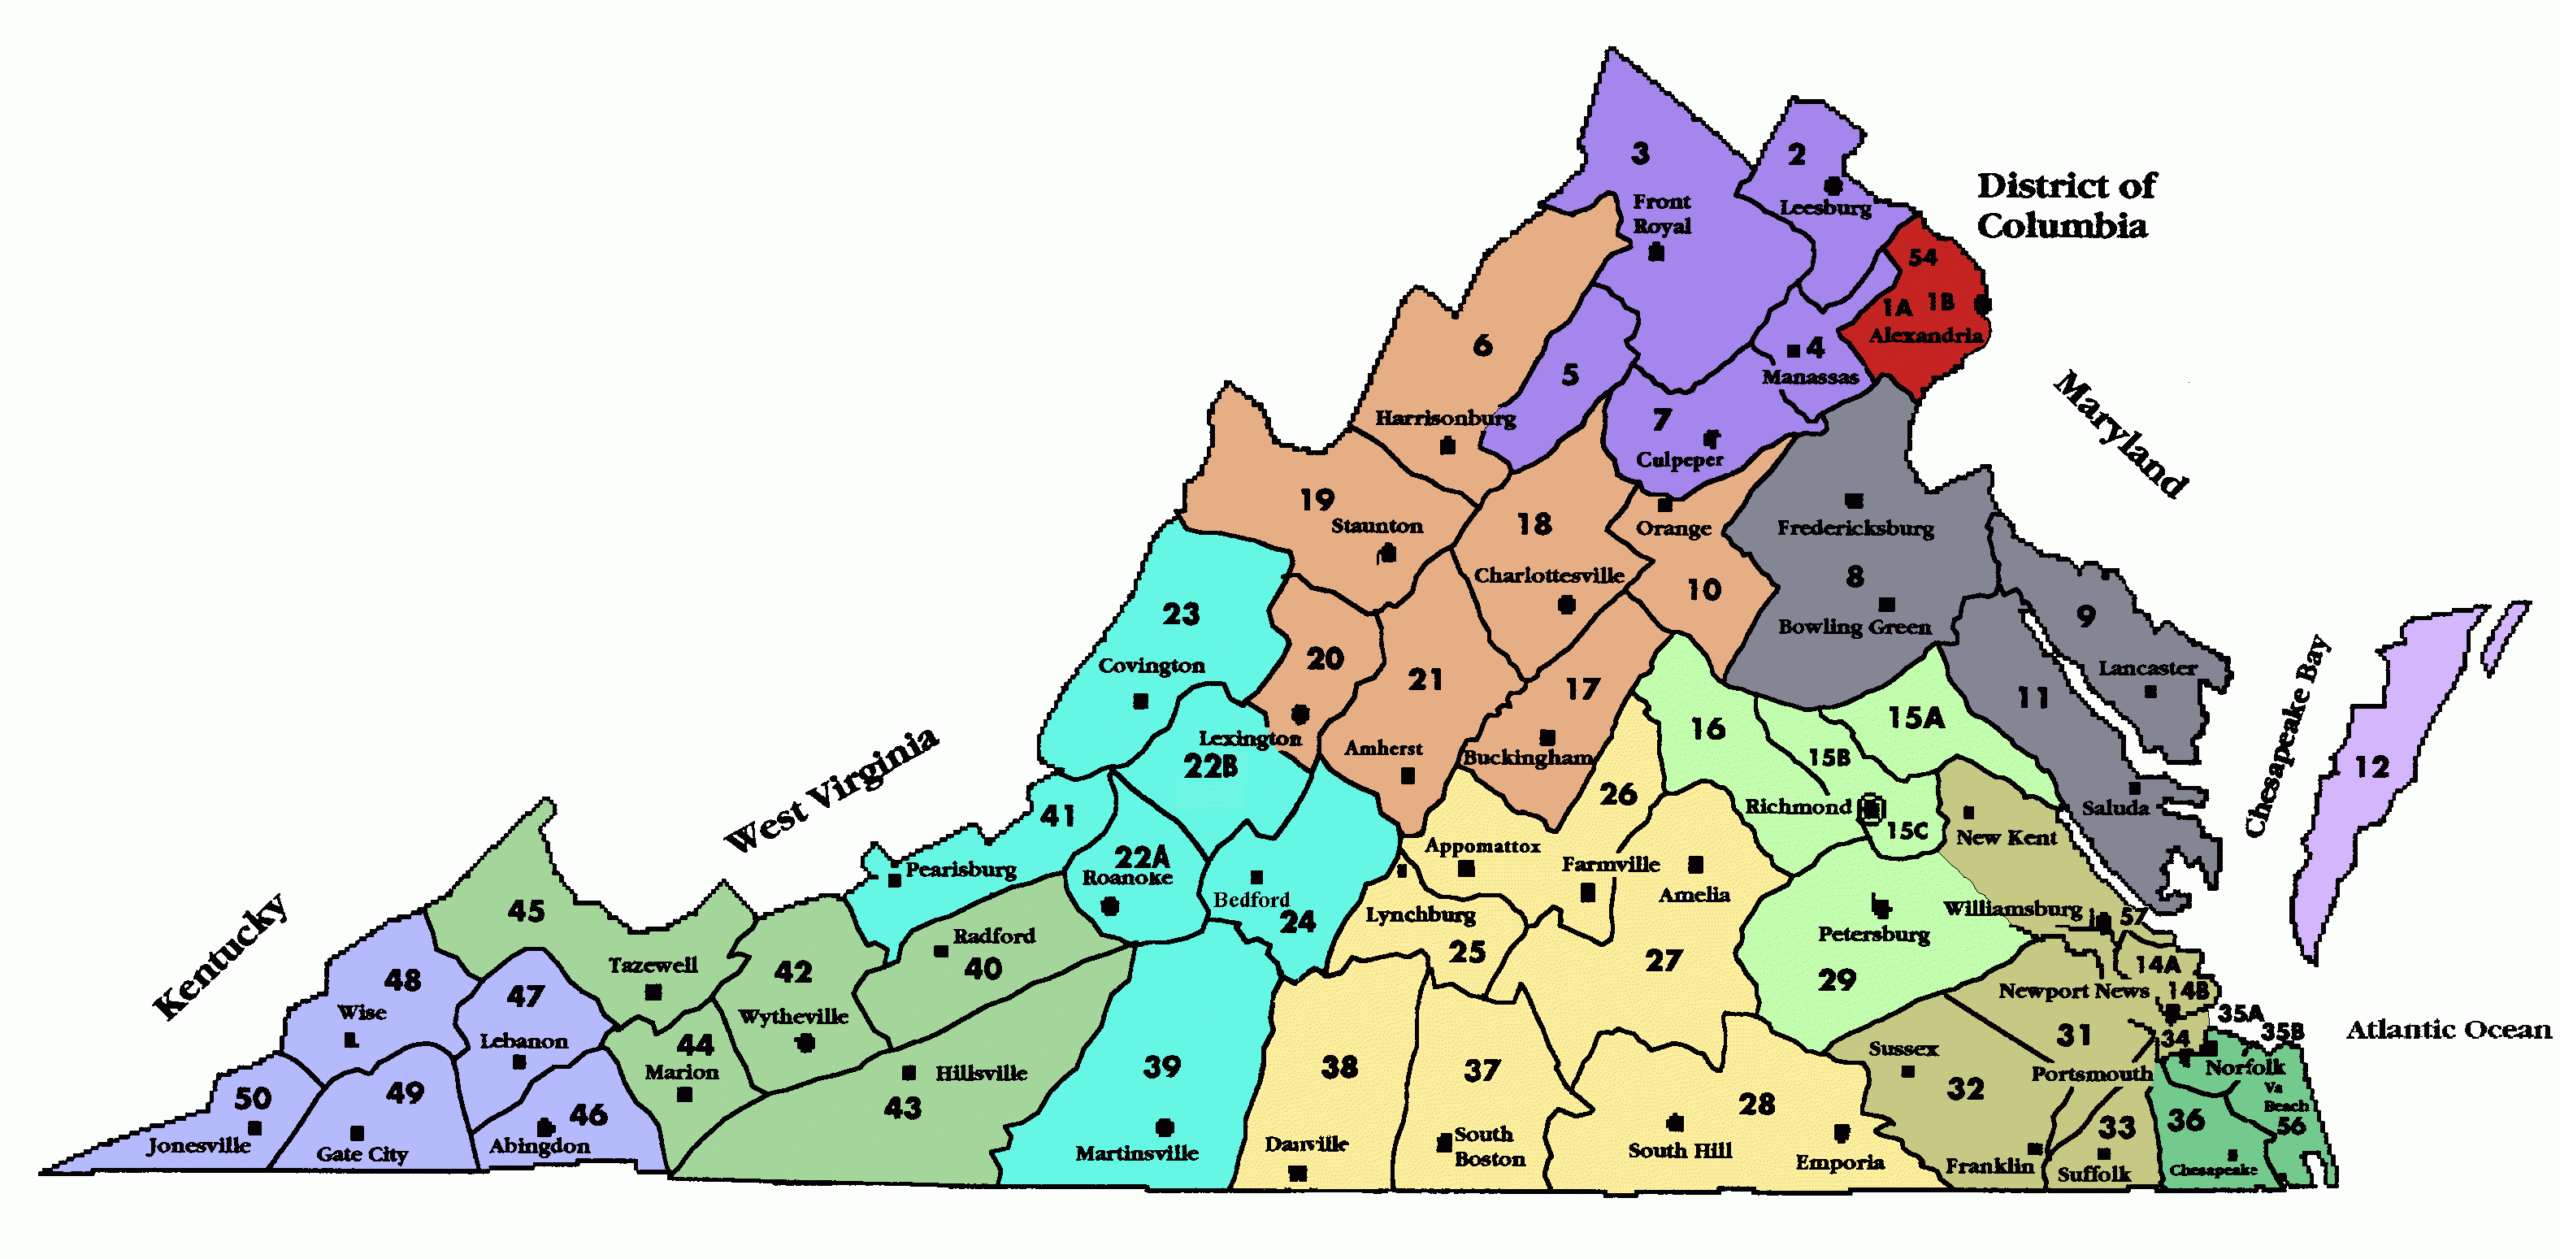 This Is An Image Of Virginia And All Of The Districts 